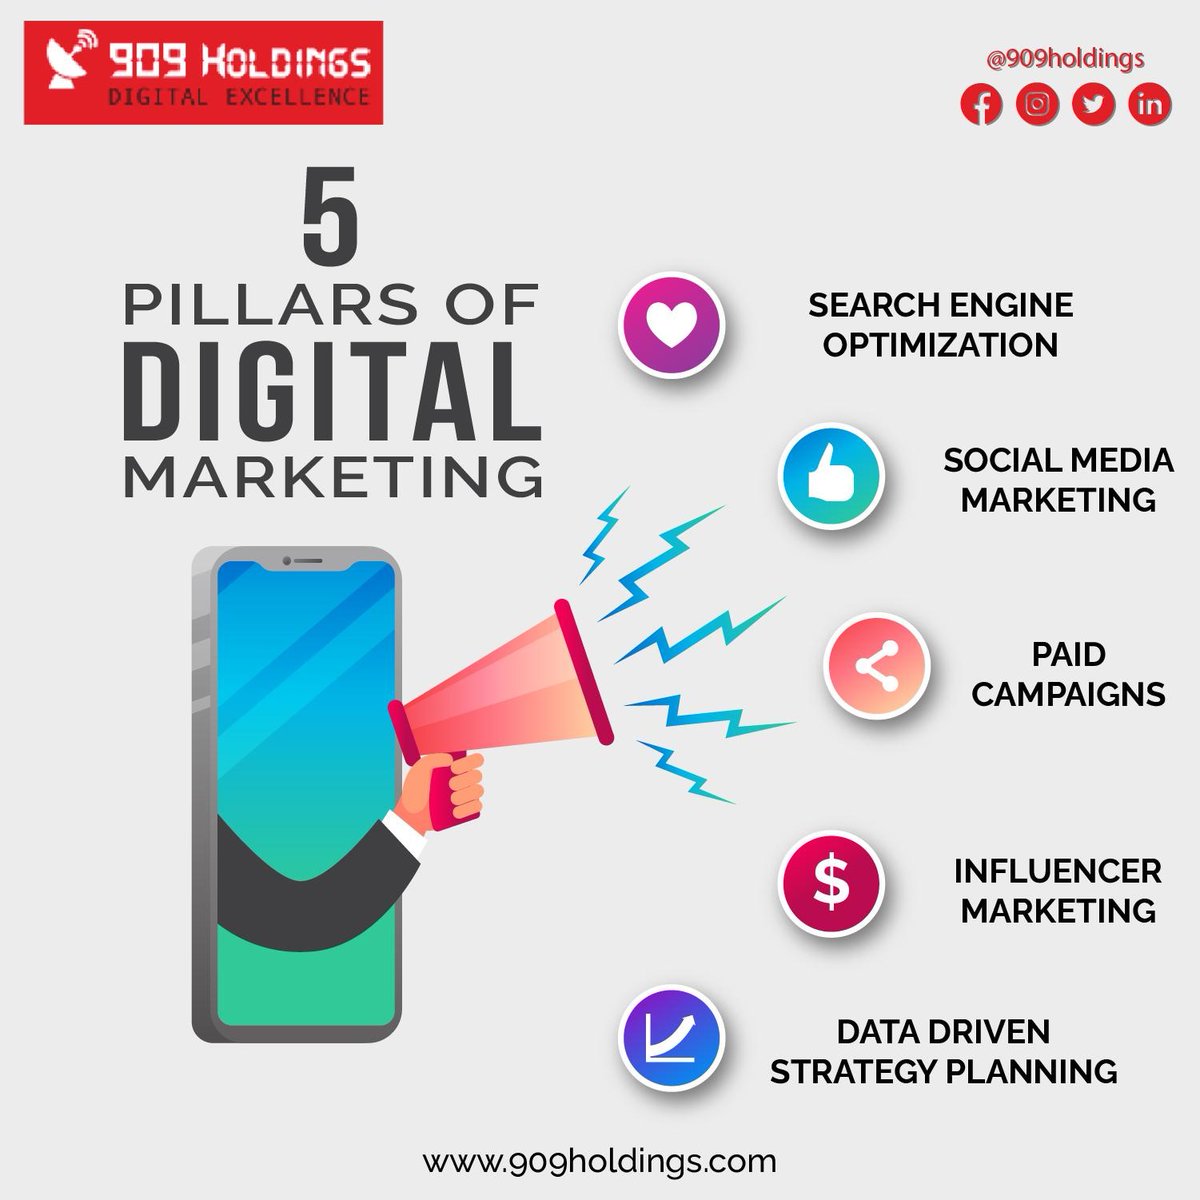 'Elevate your brand's digital presence with 909 Holdings - where creativity meets strategy and results become a language! 
#909Holdings #DigitalMasters #StrategicMarketing #BrandElevation #OnlineSuccessStory #DigitalExcellence #CreativeStrategy #DigitalImpact